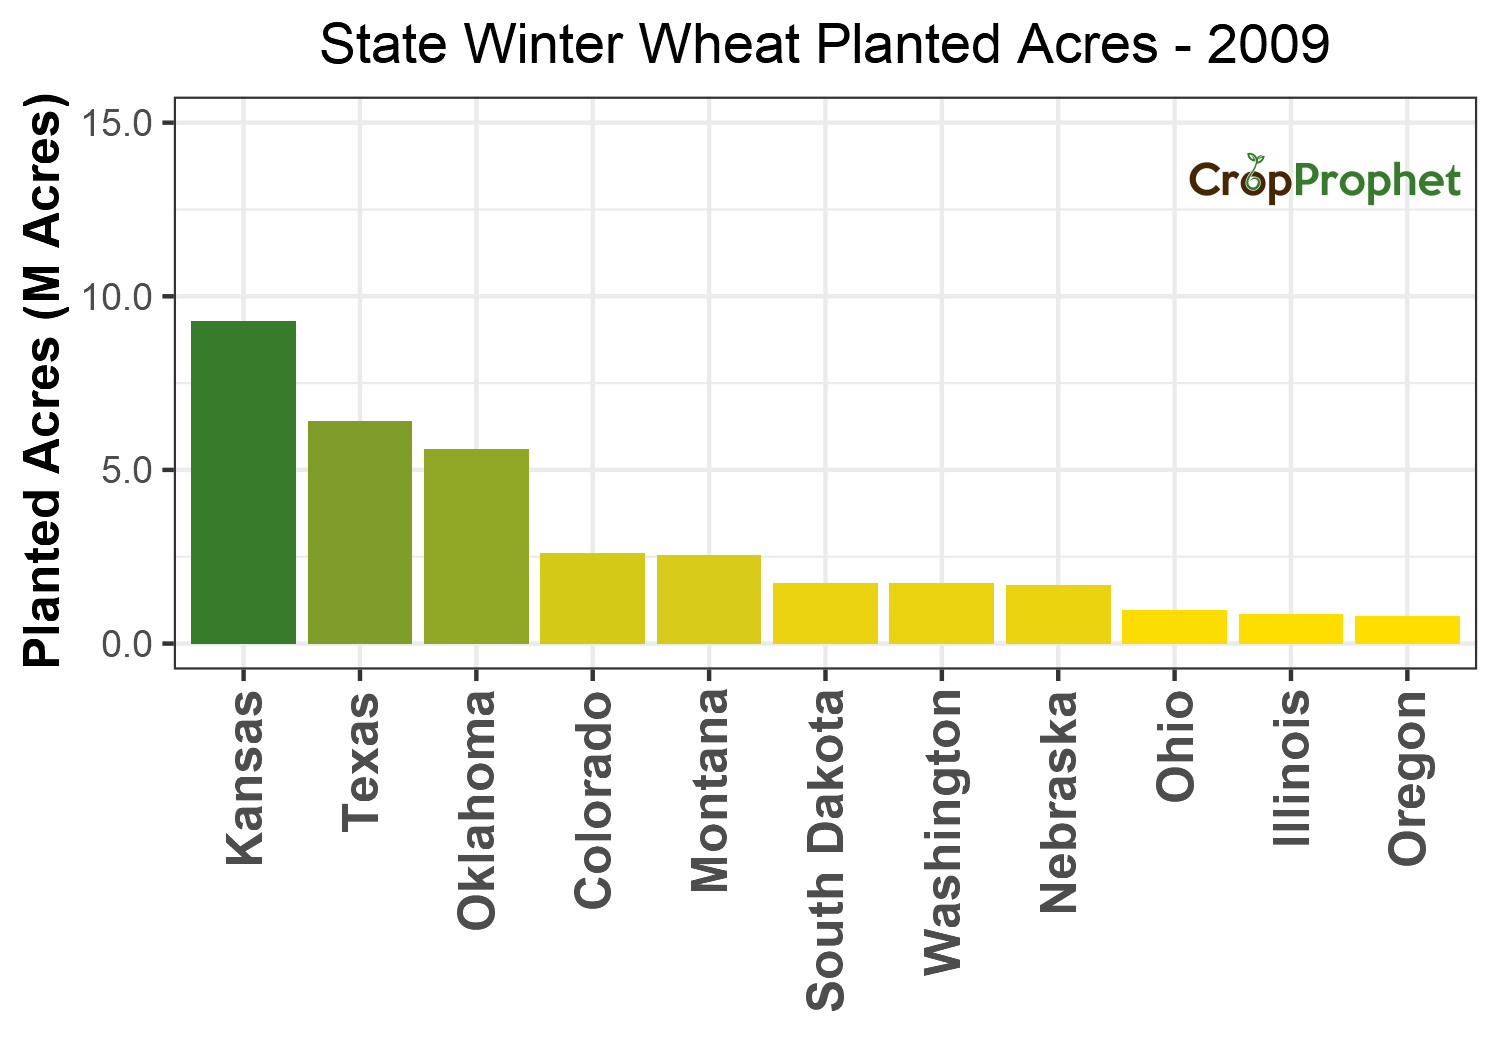 Winter wheat Production by State - 2009 Rankings